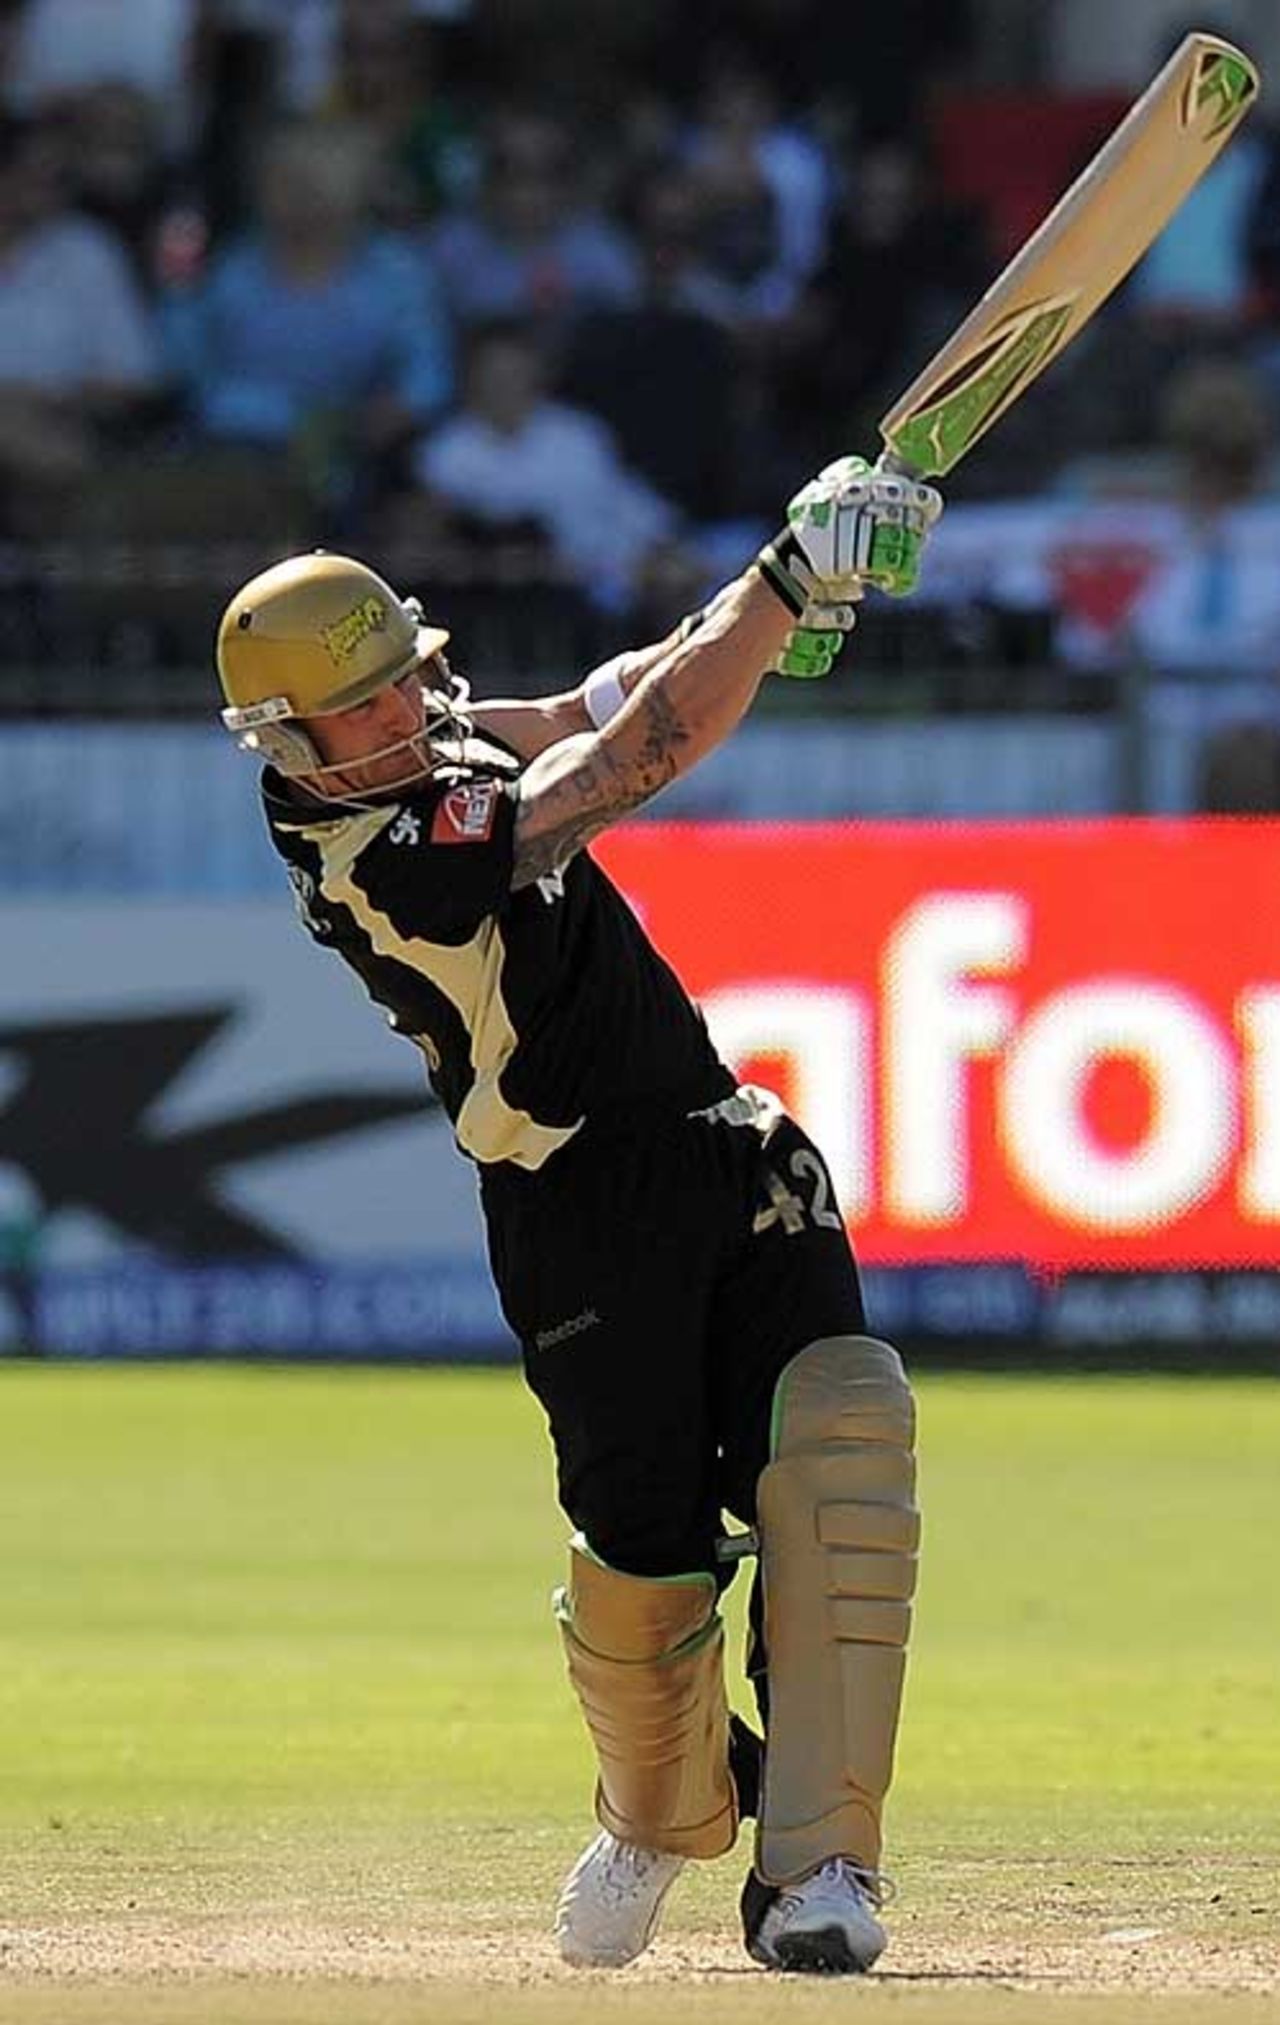 Brendon McCullum tried but just couldn't find any momentum, Kings XI Punjab v Kolkata Knight Riders, IPL, 27th match, Port Elizabeth, May 3, 2009